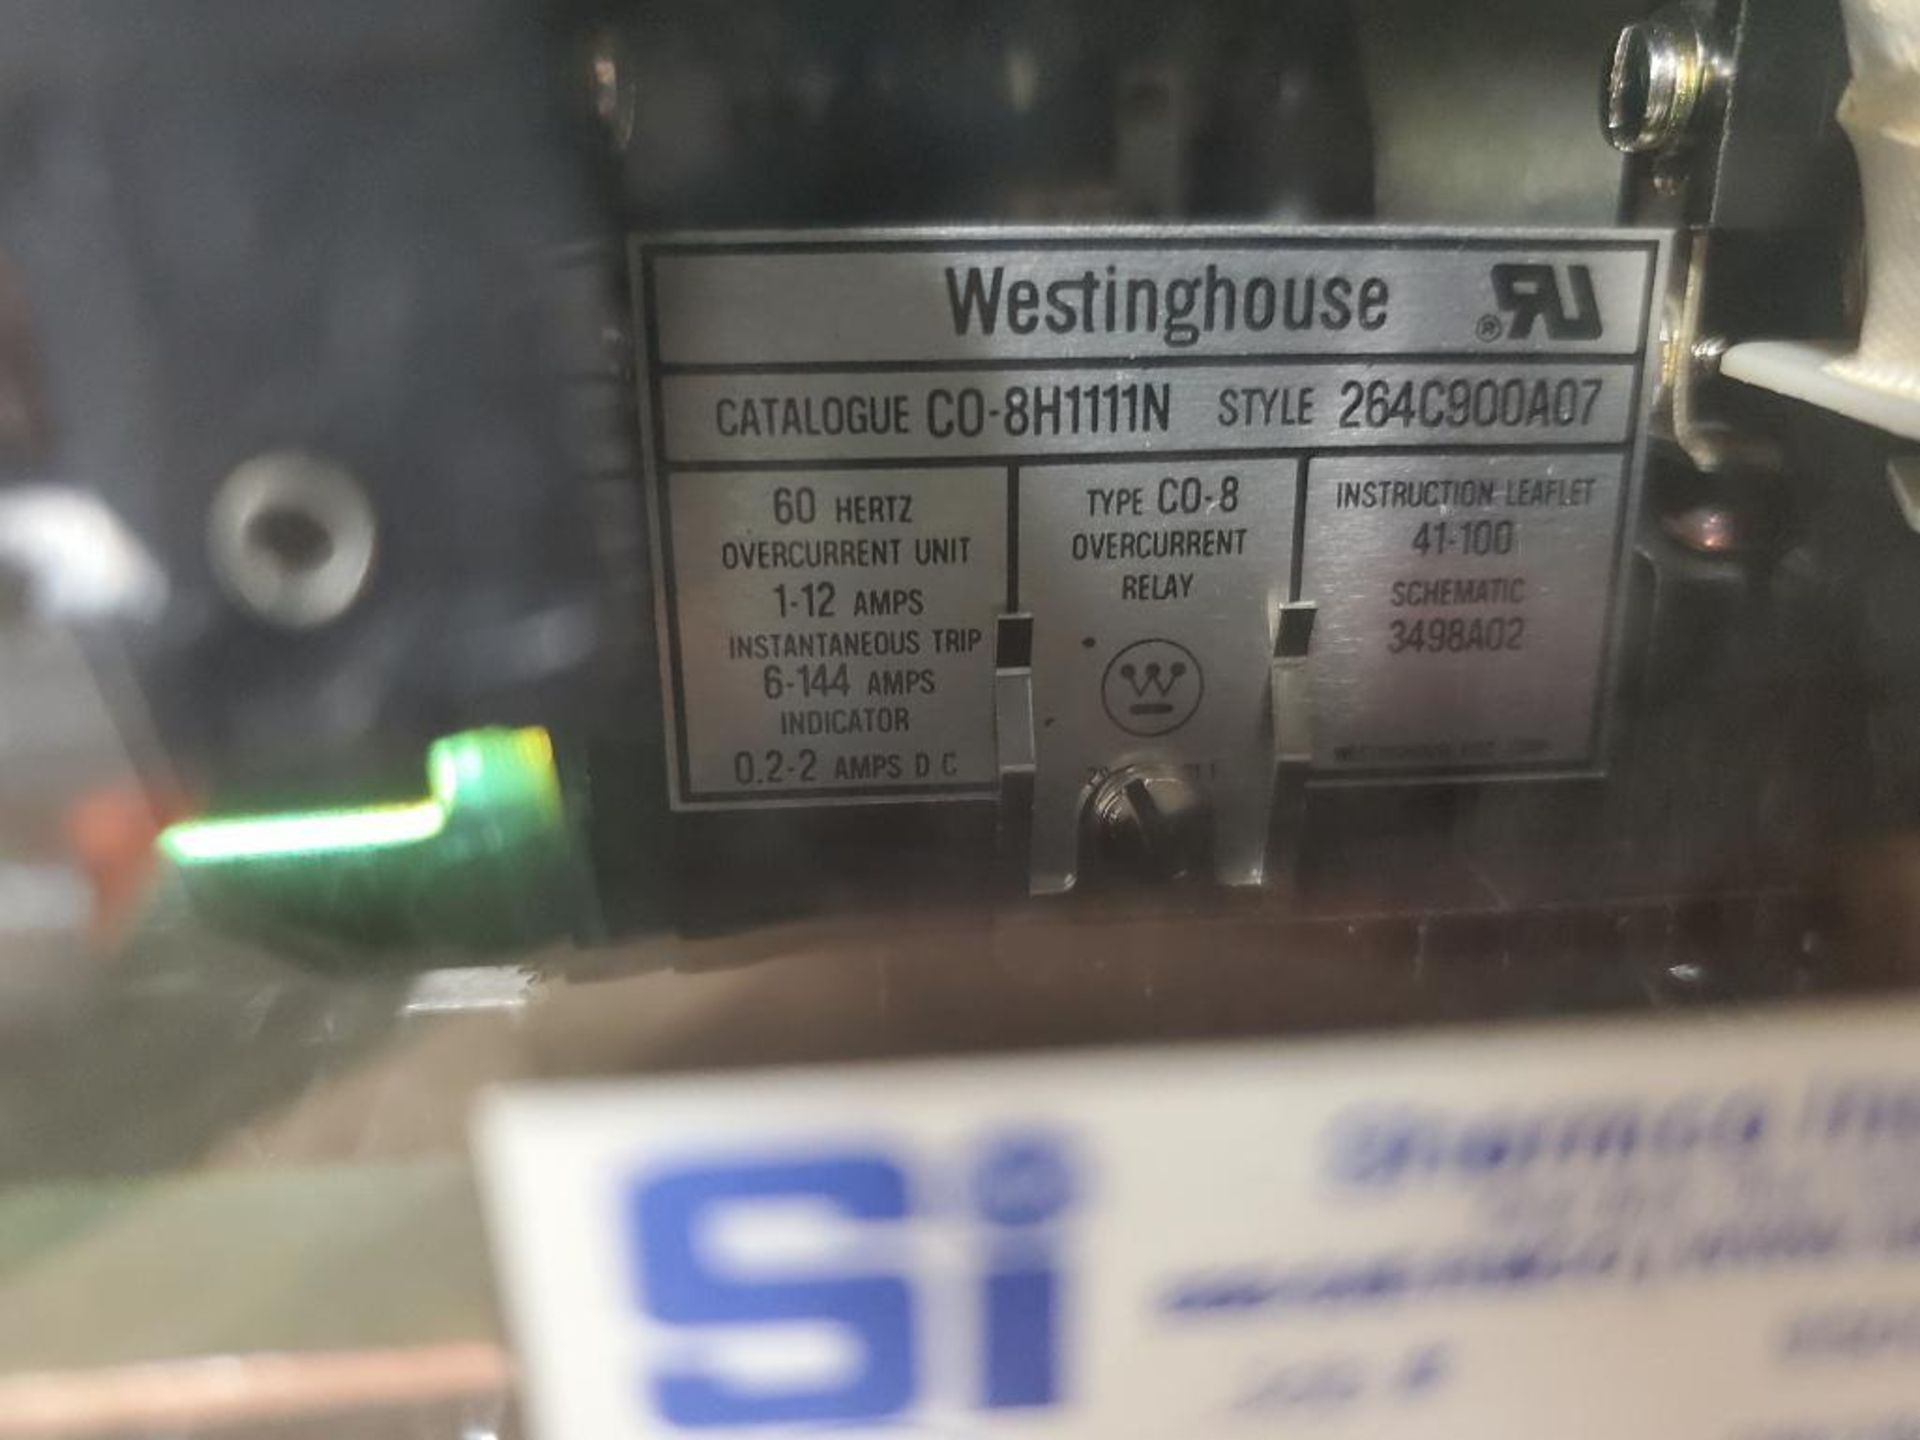 Qty 5 - Westinghouse C0-9H1111N overcurrent relay. - Image 3 of 12